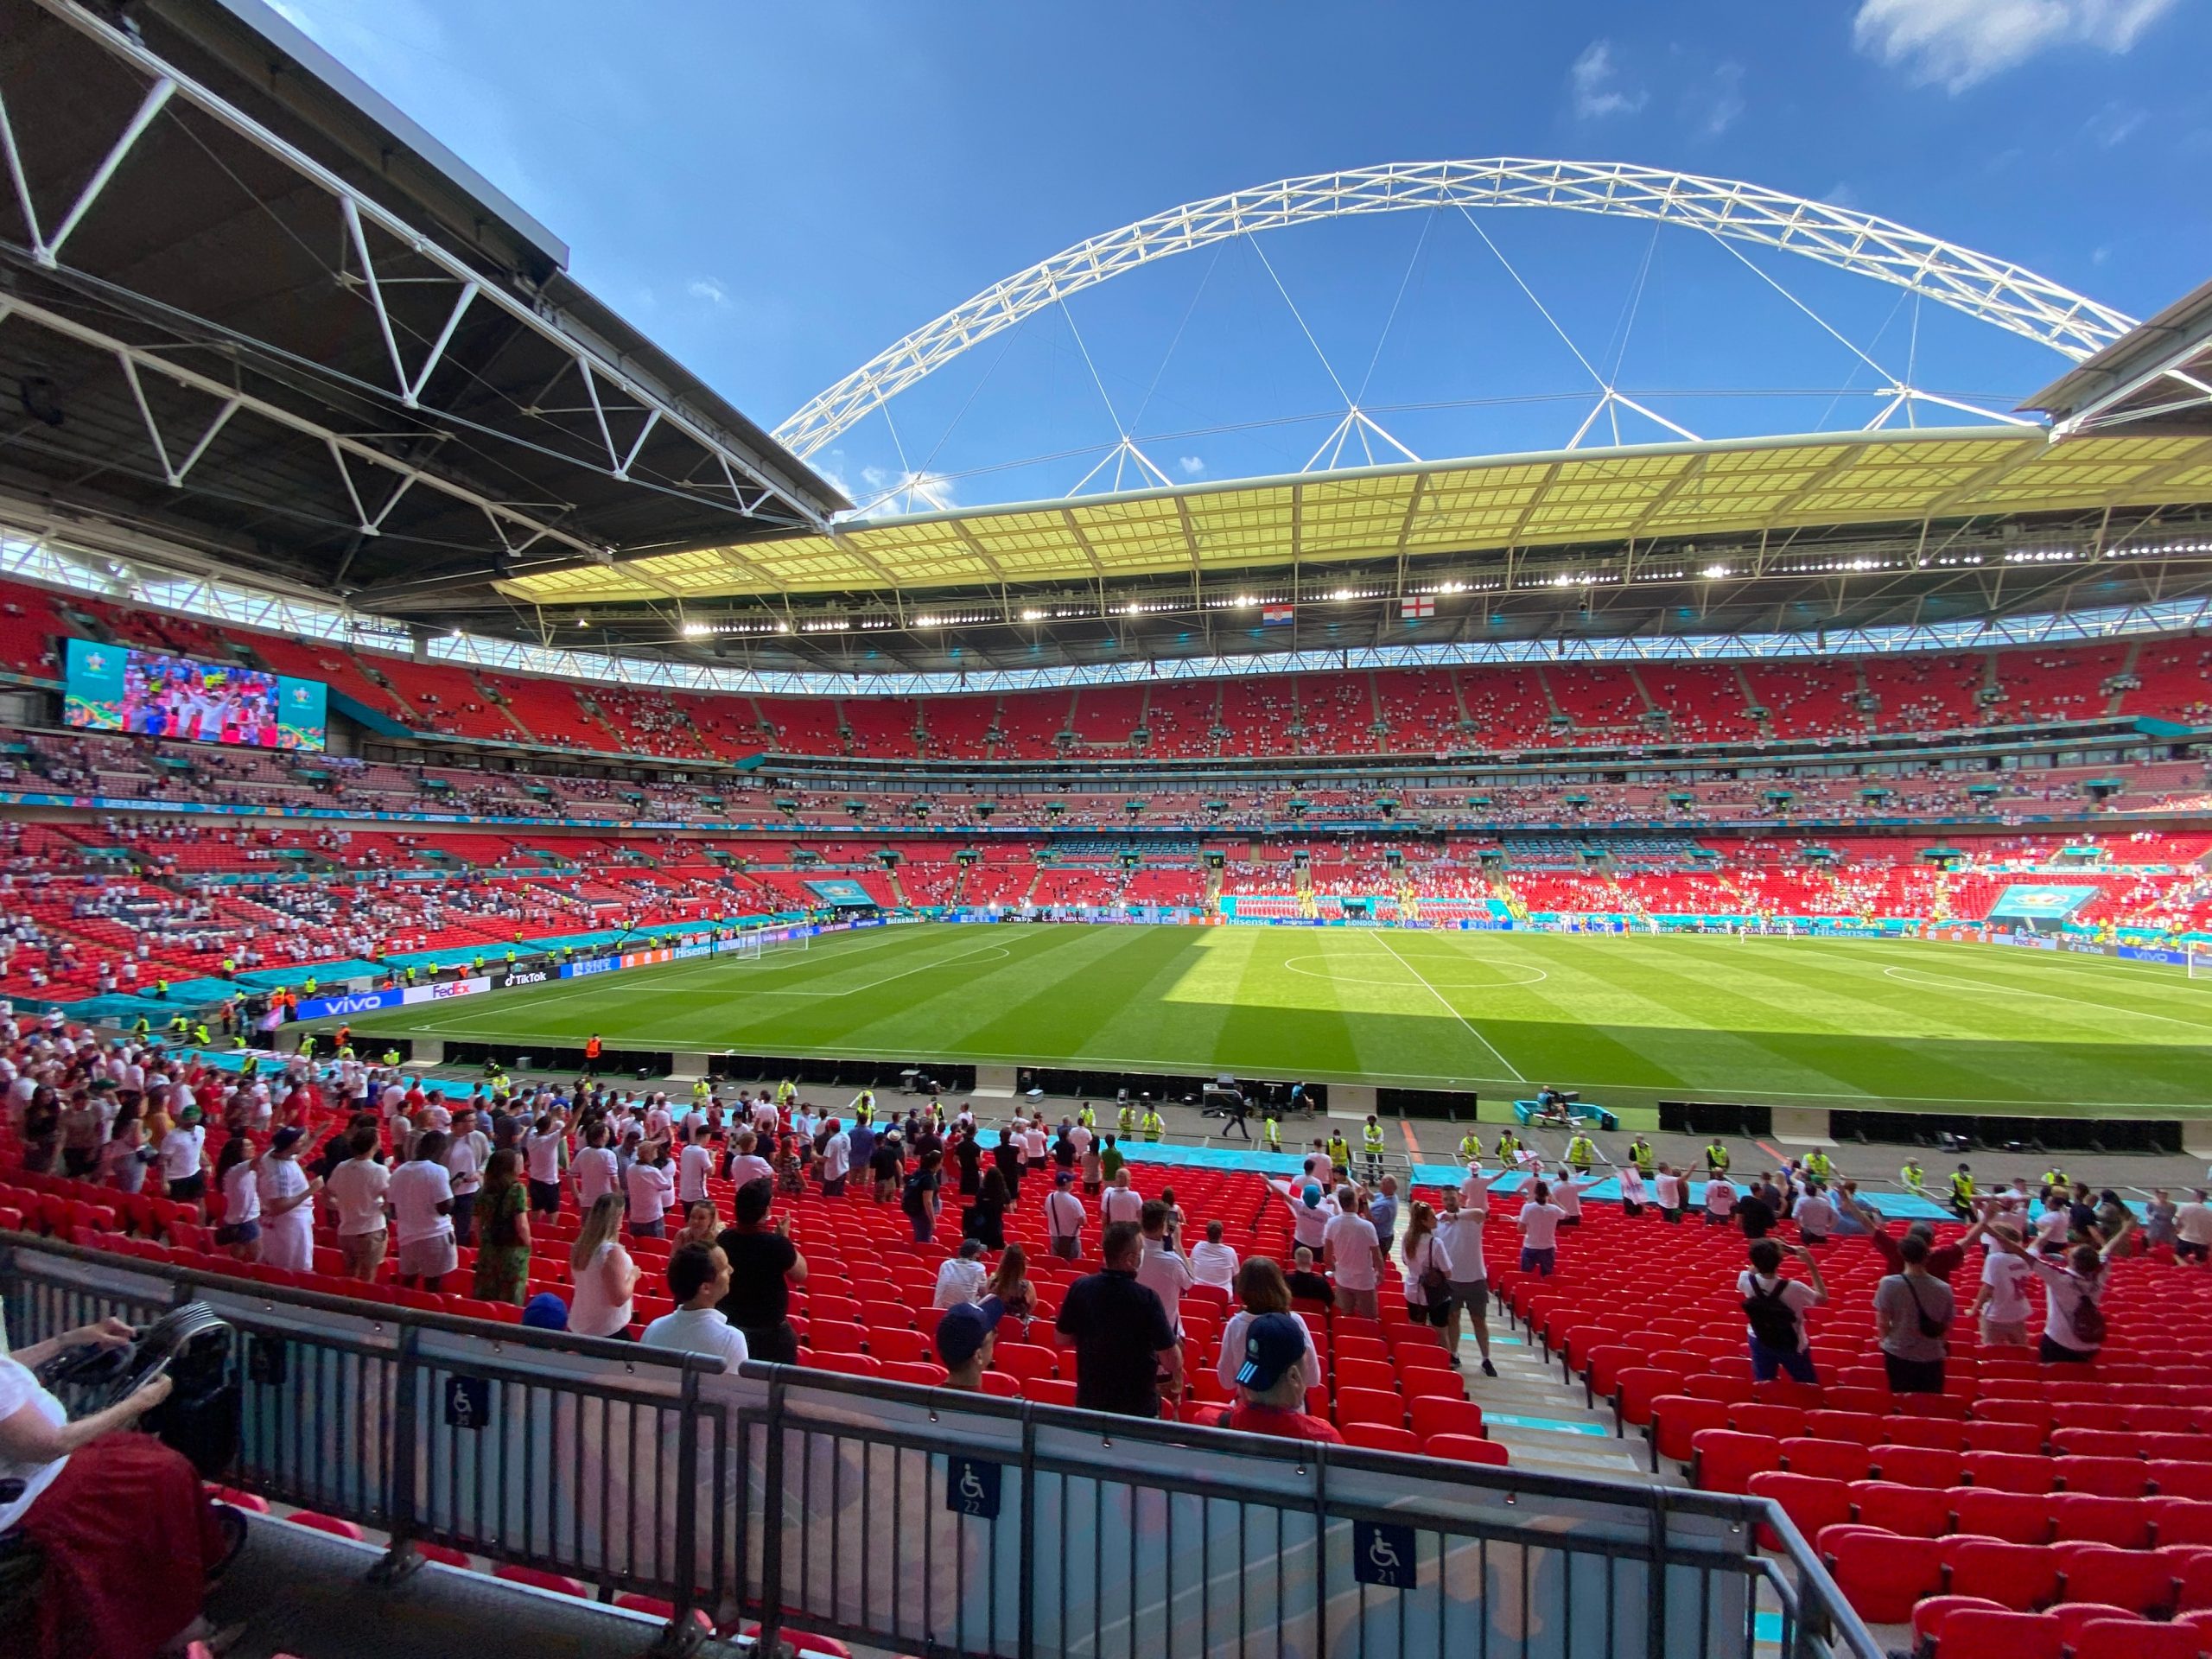 Spectators getting ready to watch EURO 2020 games at Wembley Stadium.